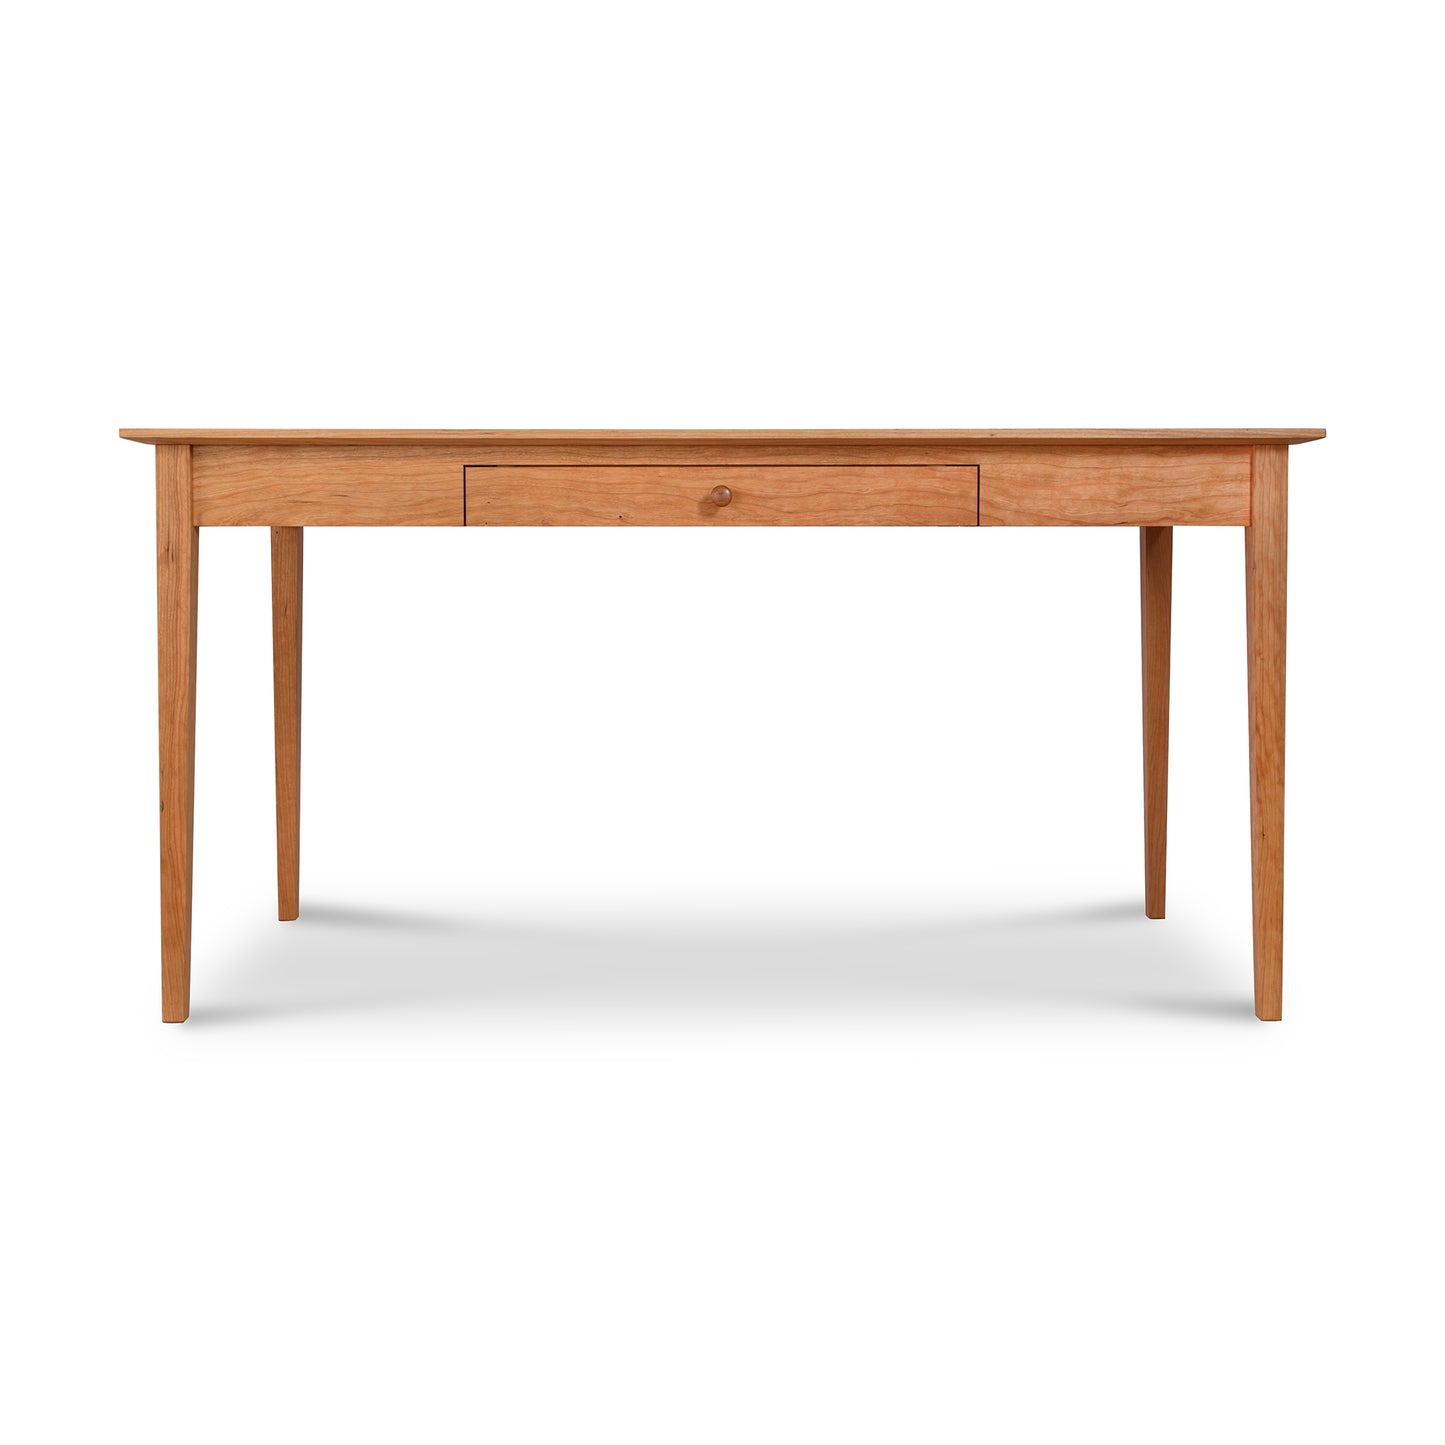 A Maple Corner Woodworks American Shaker Writing Desk, crafted from sustainably harvested hardwood, with a single centered drawer, standing against a plain white background.